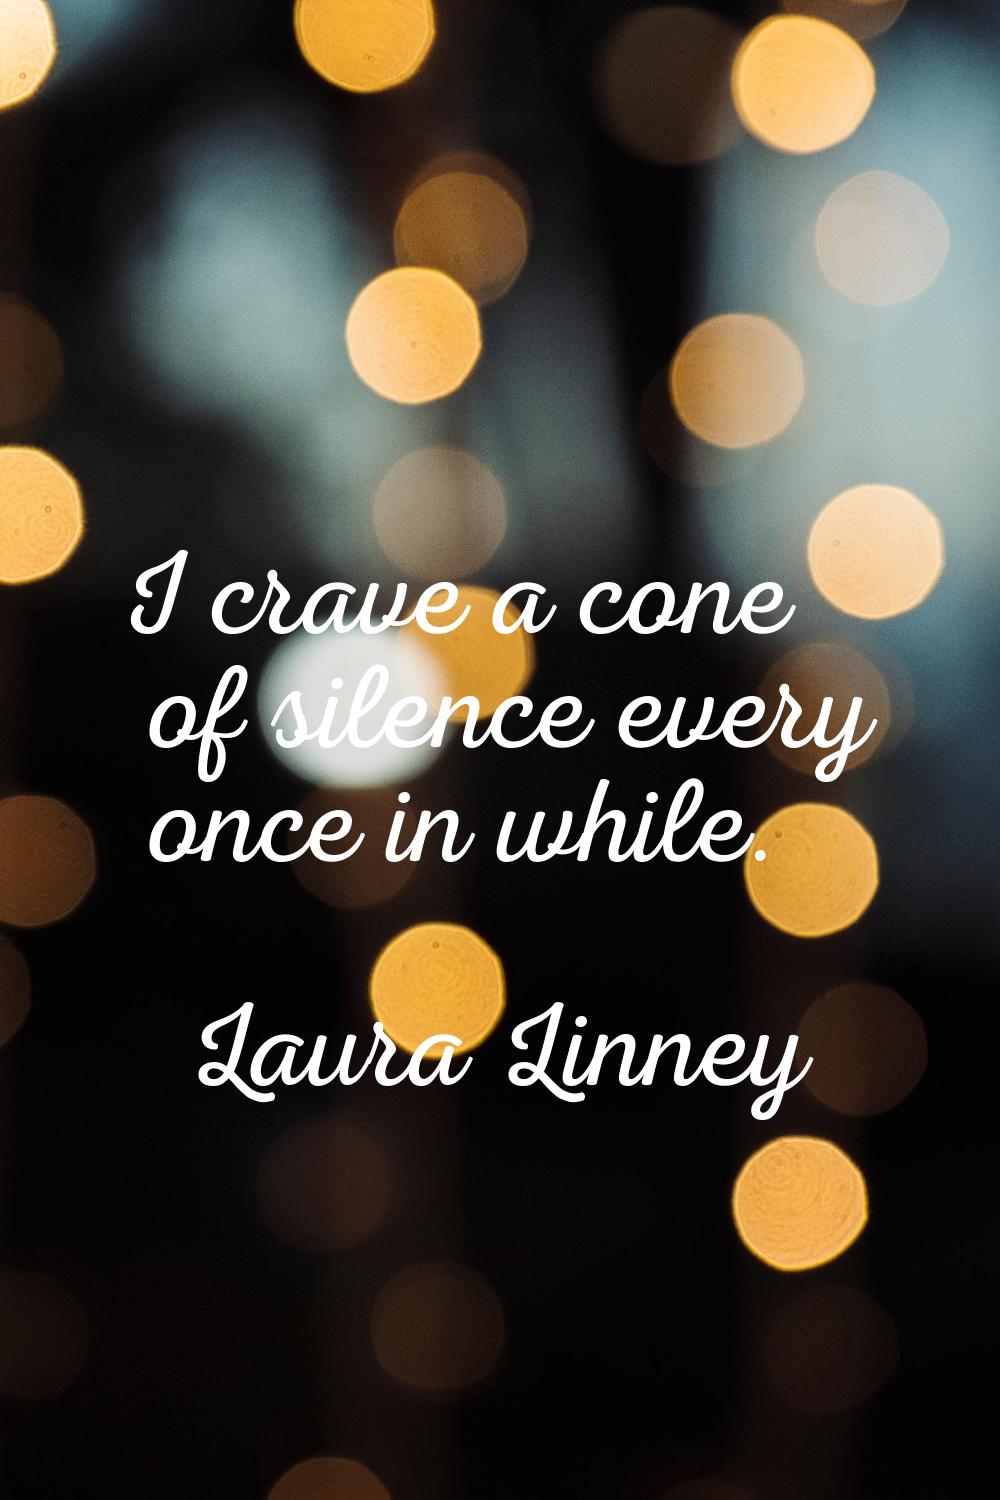 I crave a cone of silence every once in while.